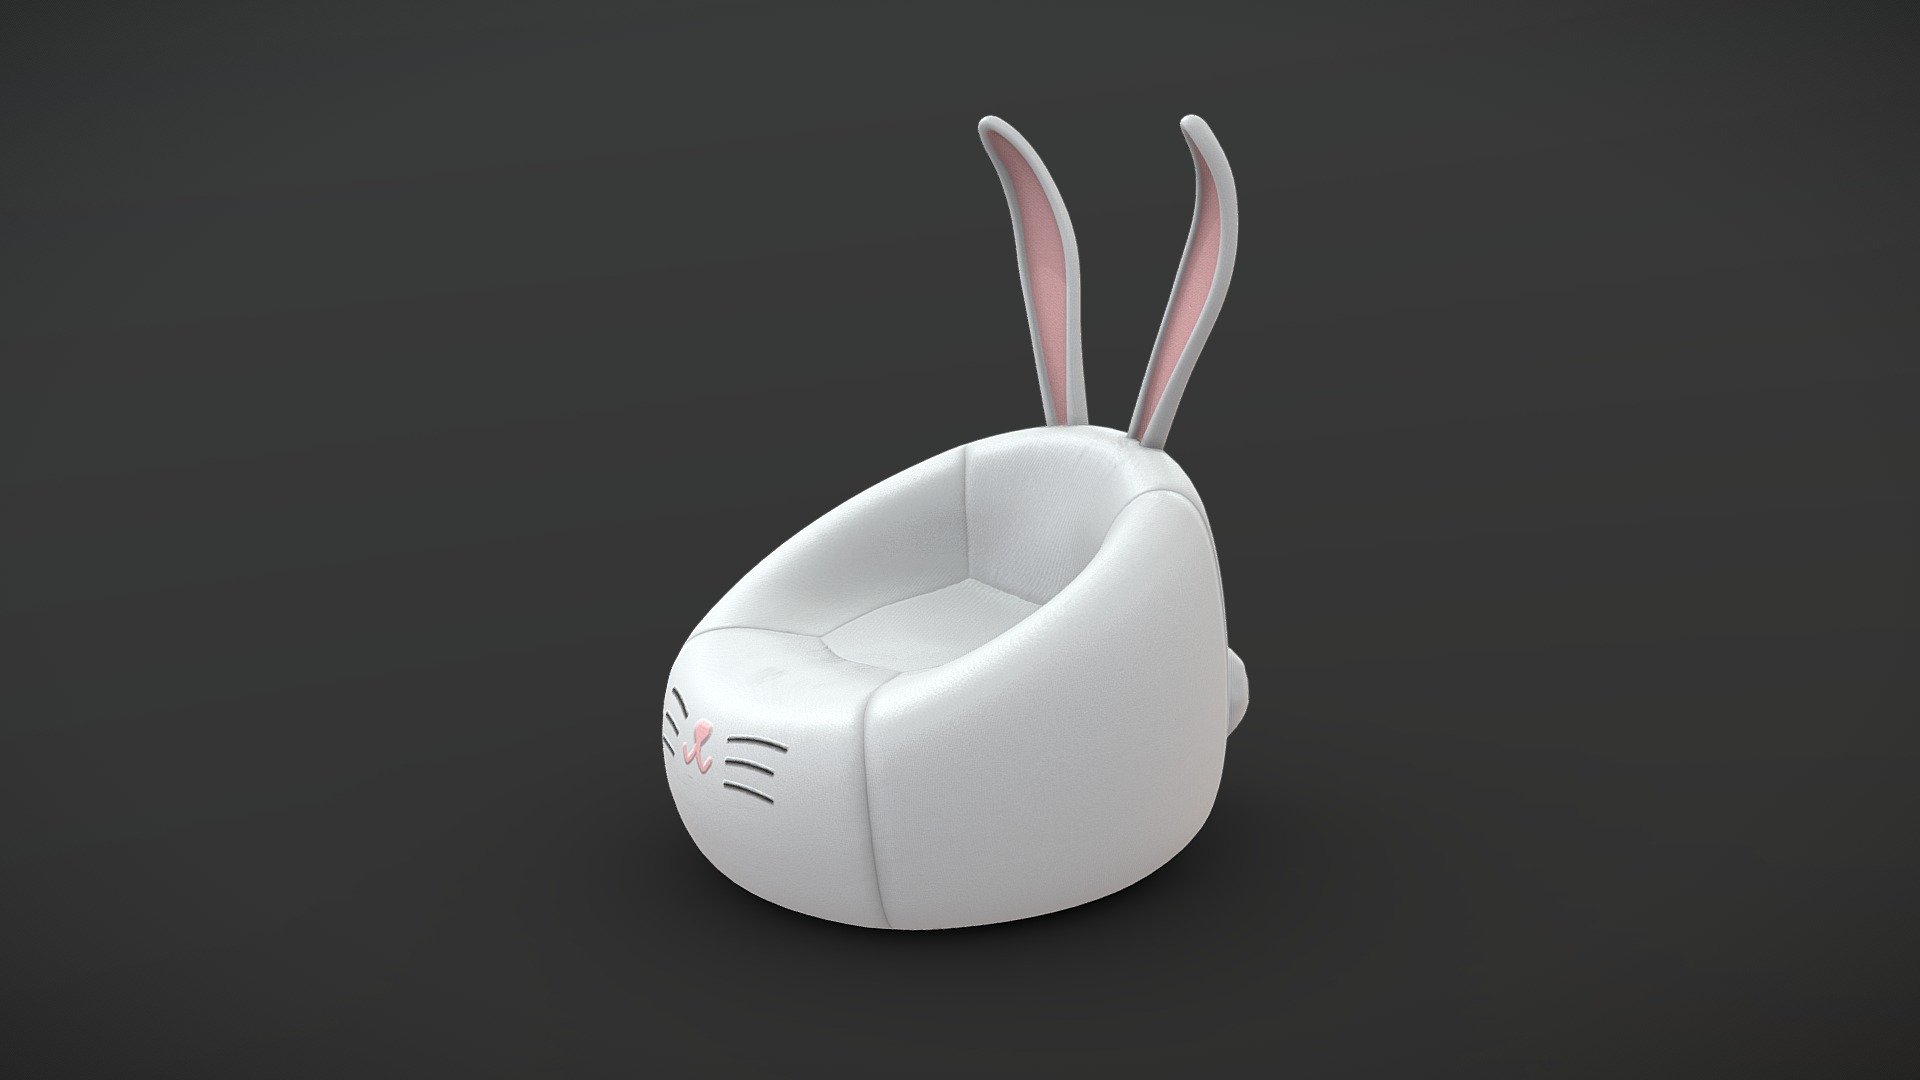 Bunny beanbag

Made in Blender and textured in Substance Painter.

Used 3x 1024x1024 material slots 3d model